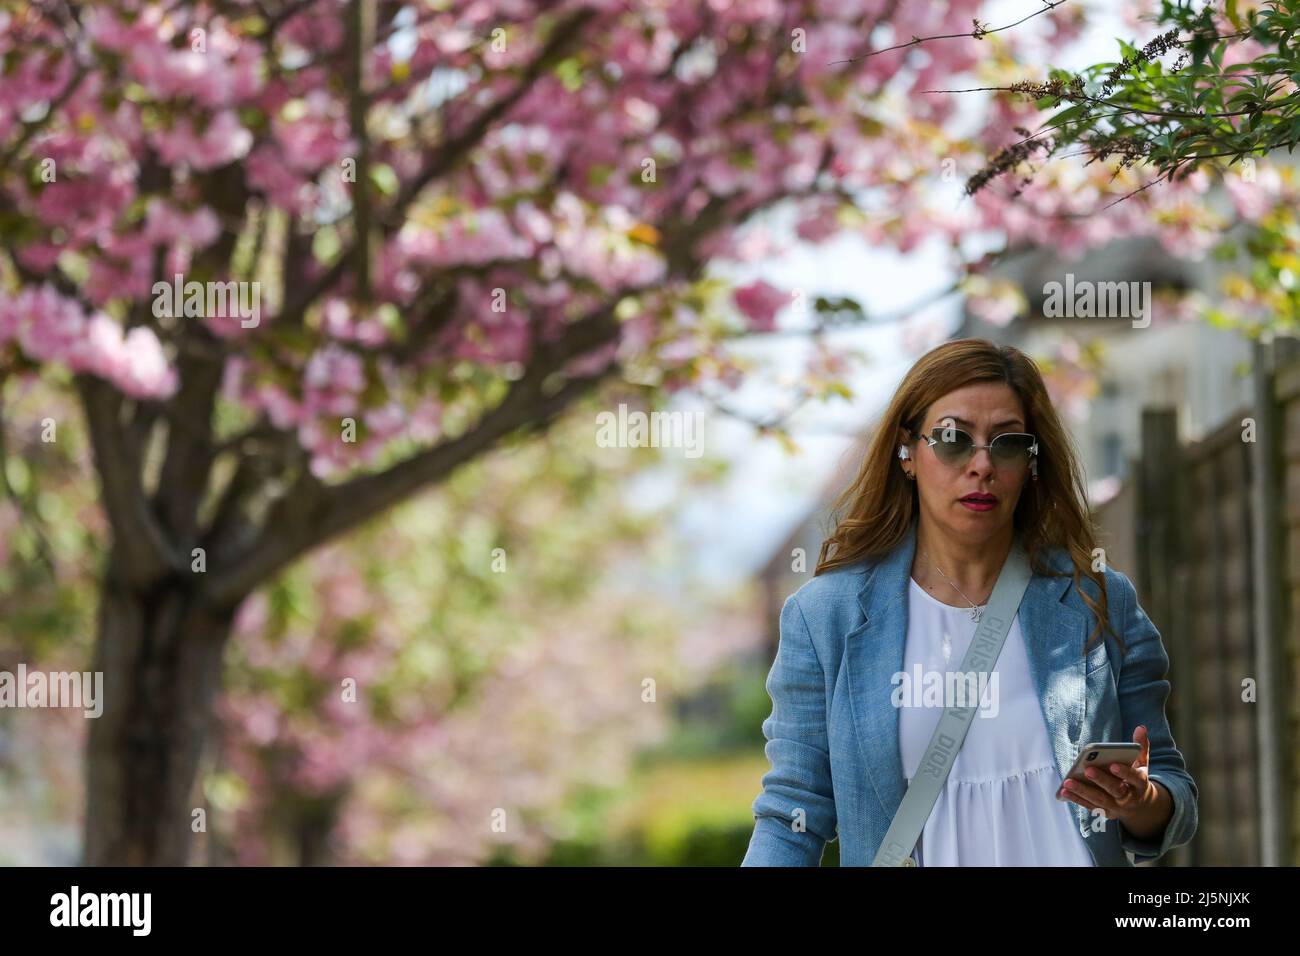 London, UK. 24th Apr, 2022. A woman walks past cherry blossom in London on a sunny and warm day. Temperatures are expected to rise with highs of 18 degrees Celsius for parts of London and South East England. (Photo by Steve Taylor/SOPA Images/Sipa USA) Credit: Sipa USA/Alamy Live News Stock Photo